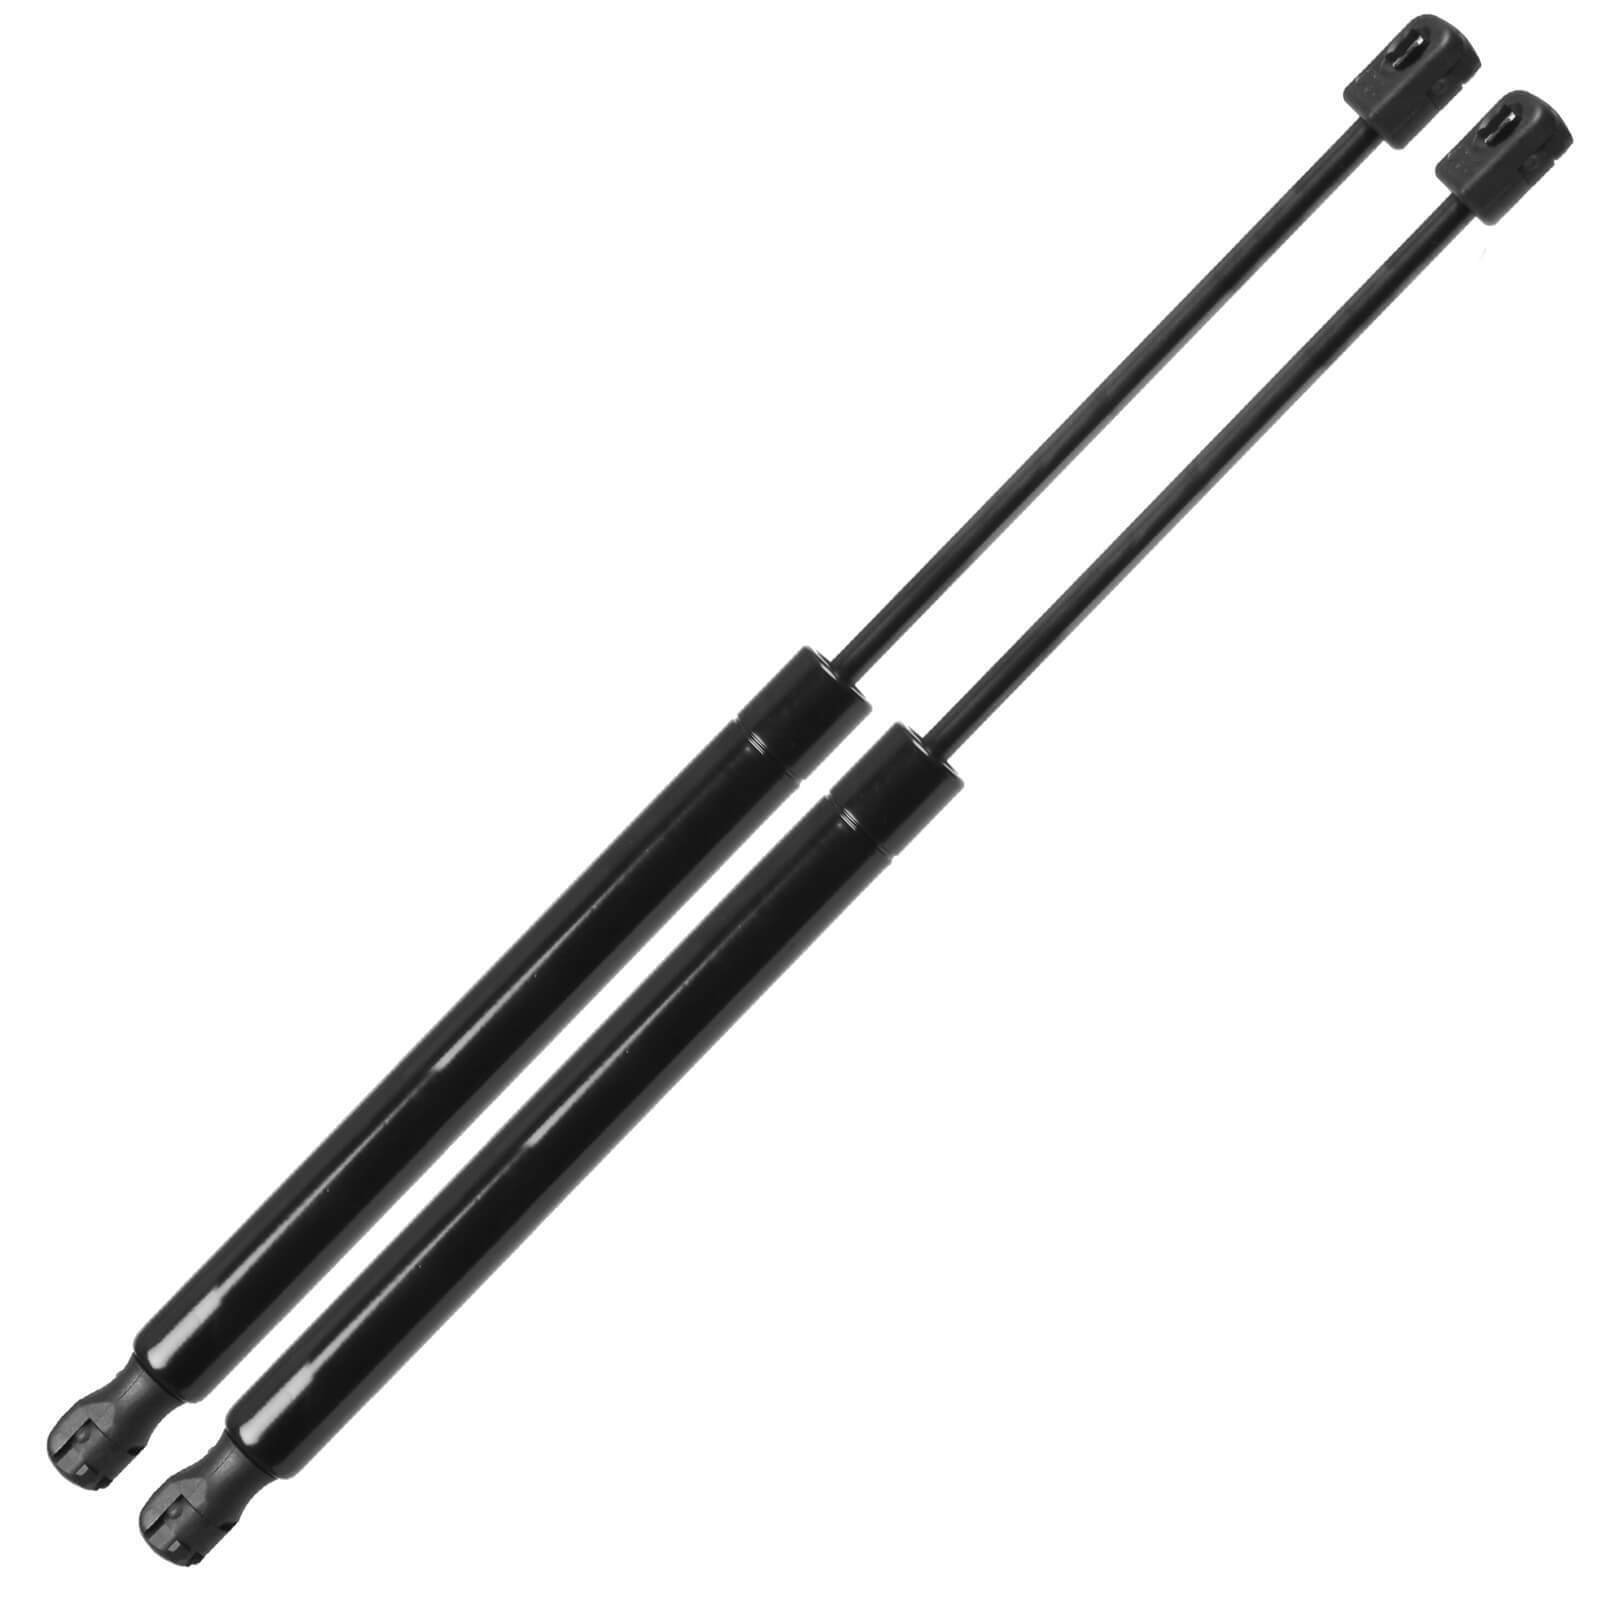 Qty 2 Fits Cadillac XLR 2004 to 2009 Rear Trunk Lift Supports